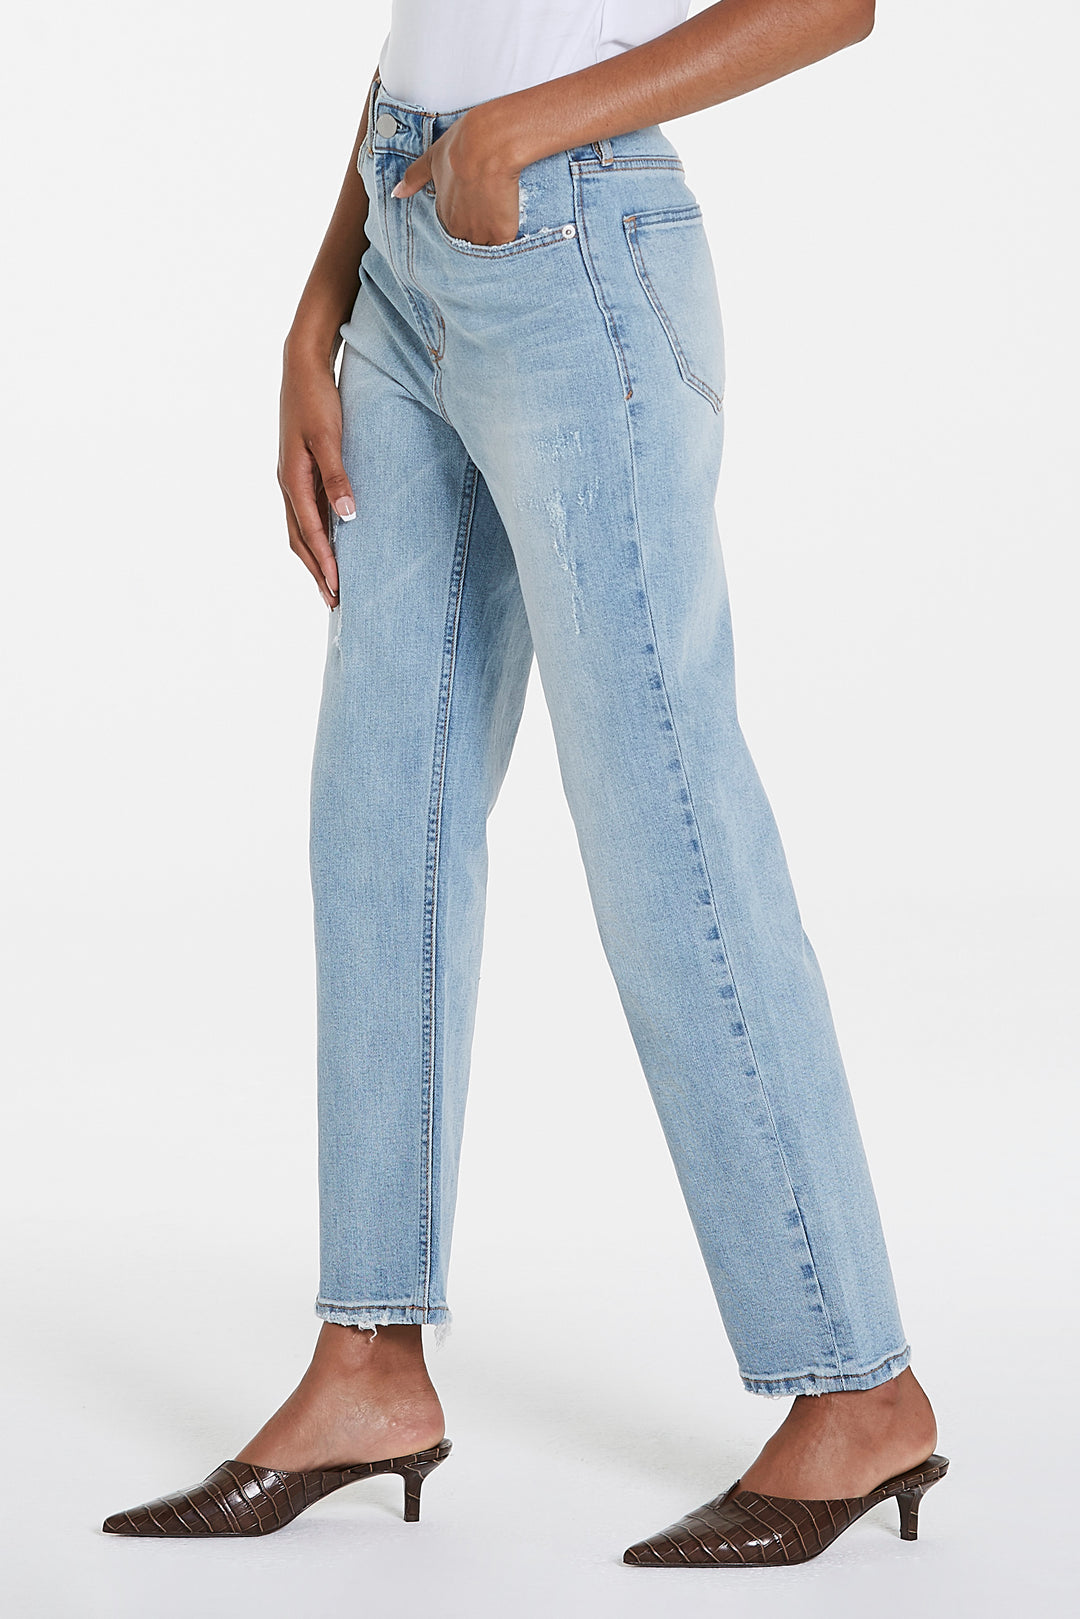 image of a female model wearing a 90S ULTRA HIGH RISE ANKLE STRAIGHT JEANS CALABASAS DEAR JOHN DENIM 